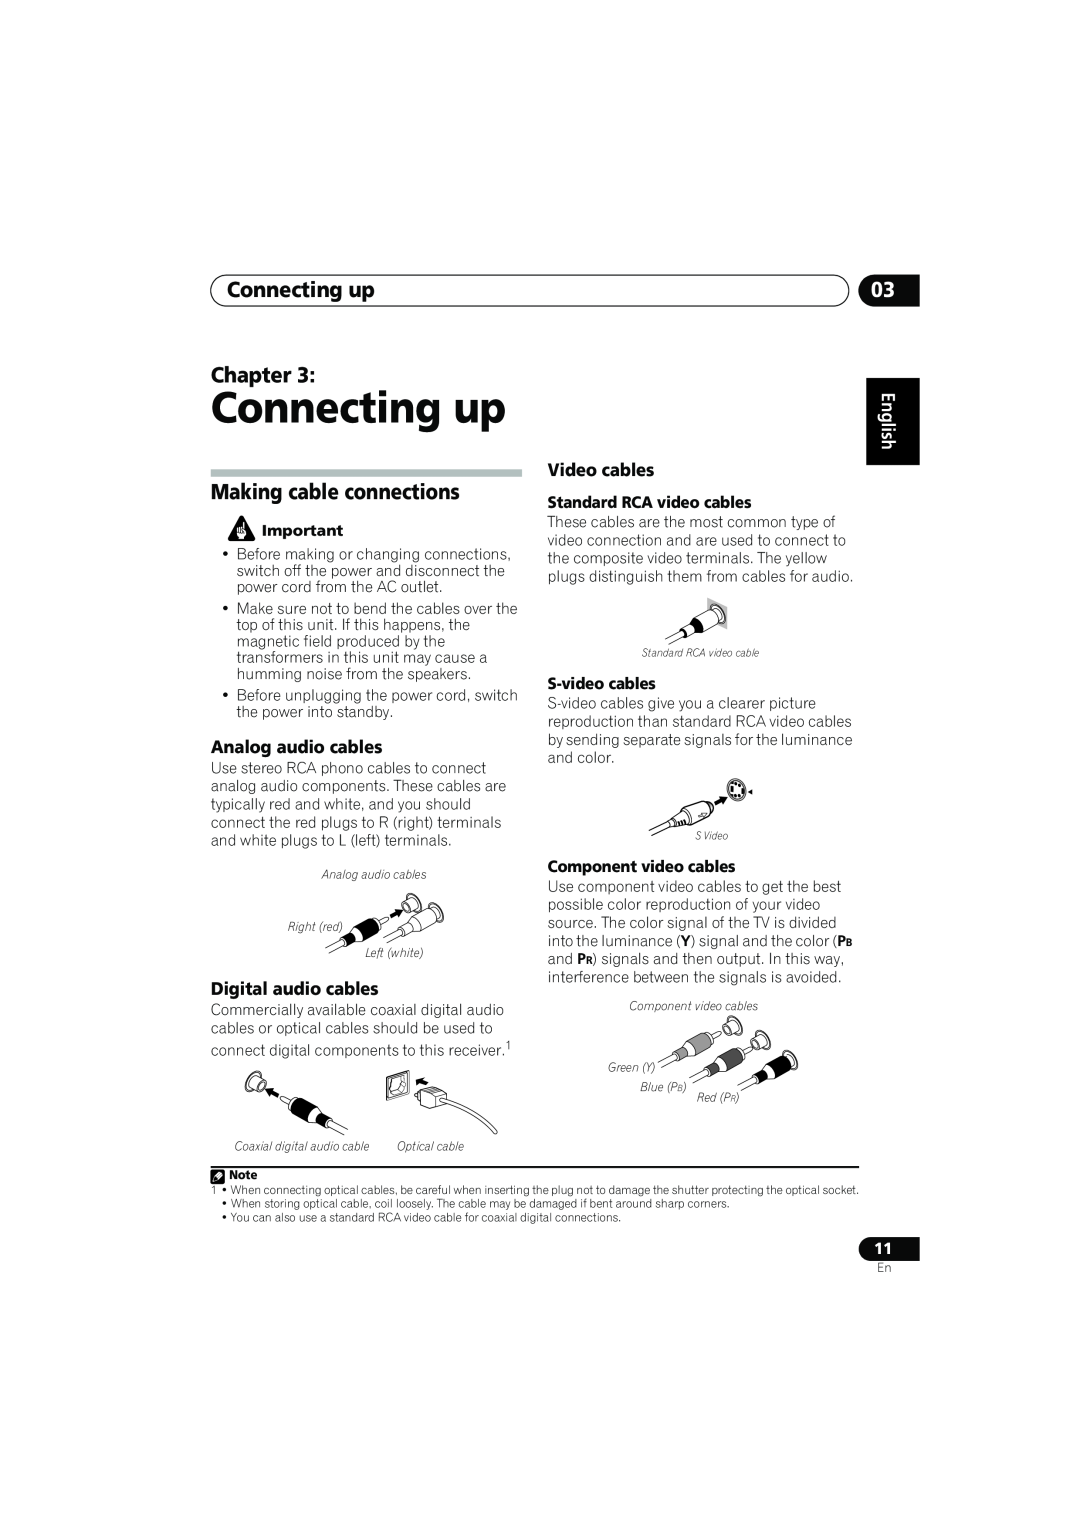 Pioneer VSX-917V manual Connecting up Chapter, Making cable connections, Video cables, Analog audio cables, English 